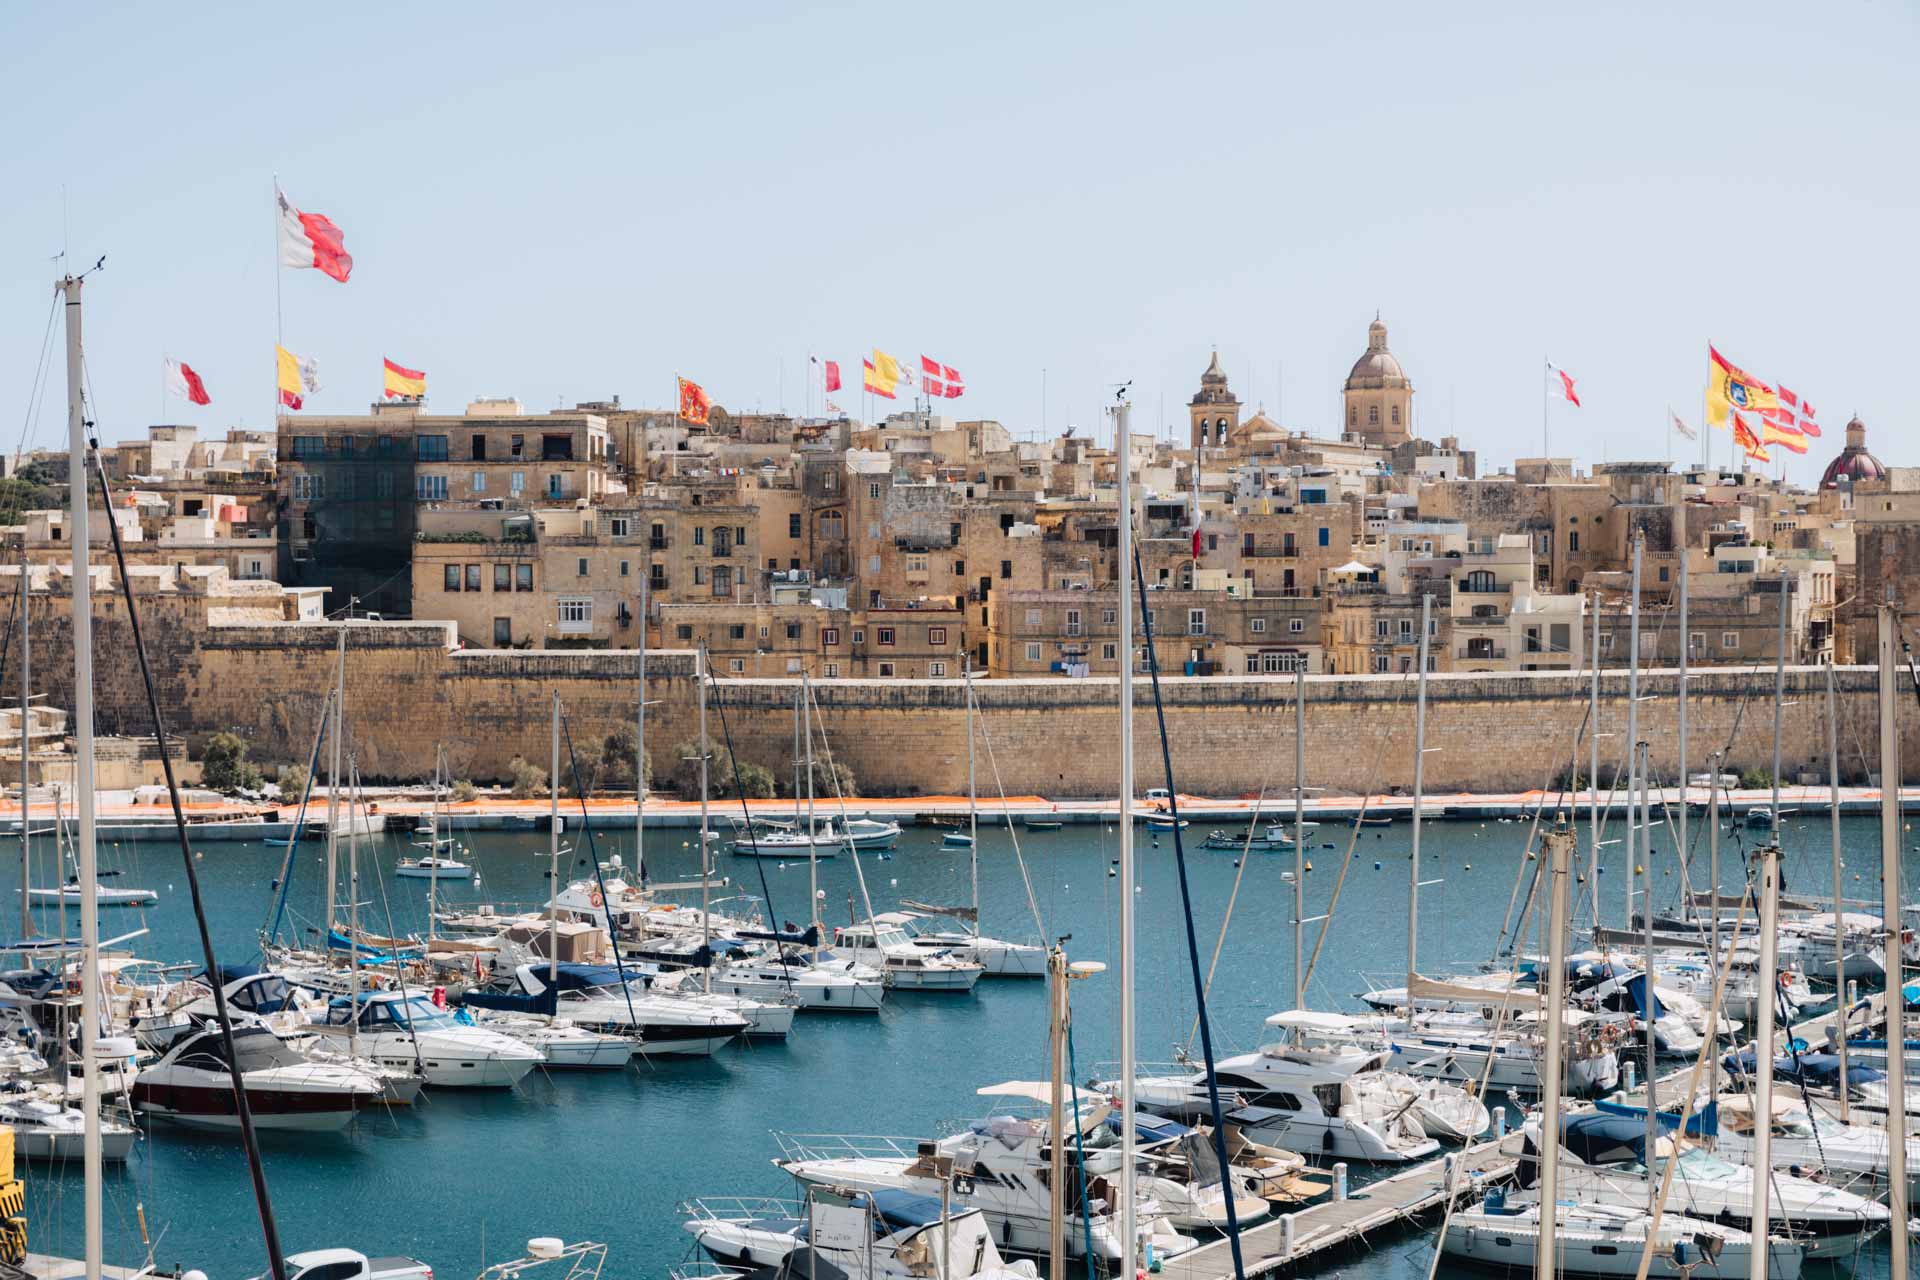 things to do in malta, places to visit in Malta, things to do on Malta, malta attractions, malta tourist attractions, best places to visit in malta, activities in malta, malta digital nomad visa, where to stay in valletta